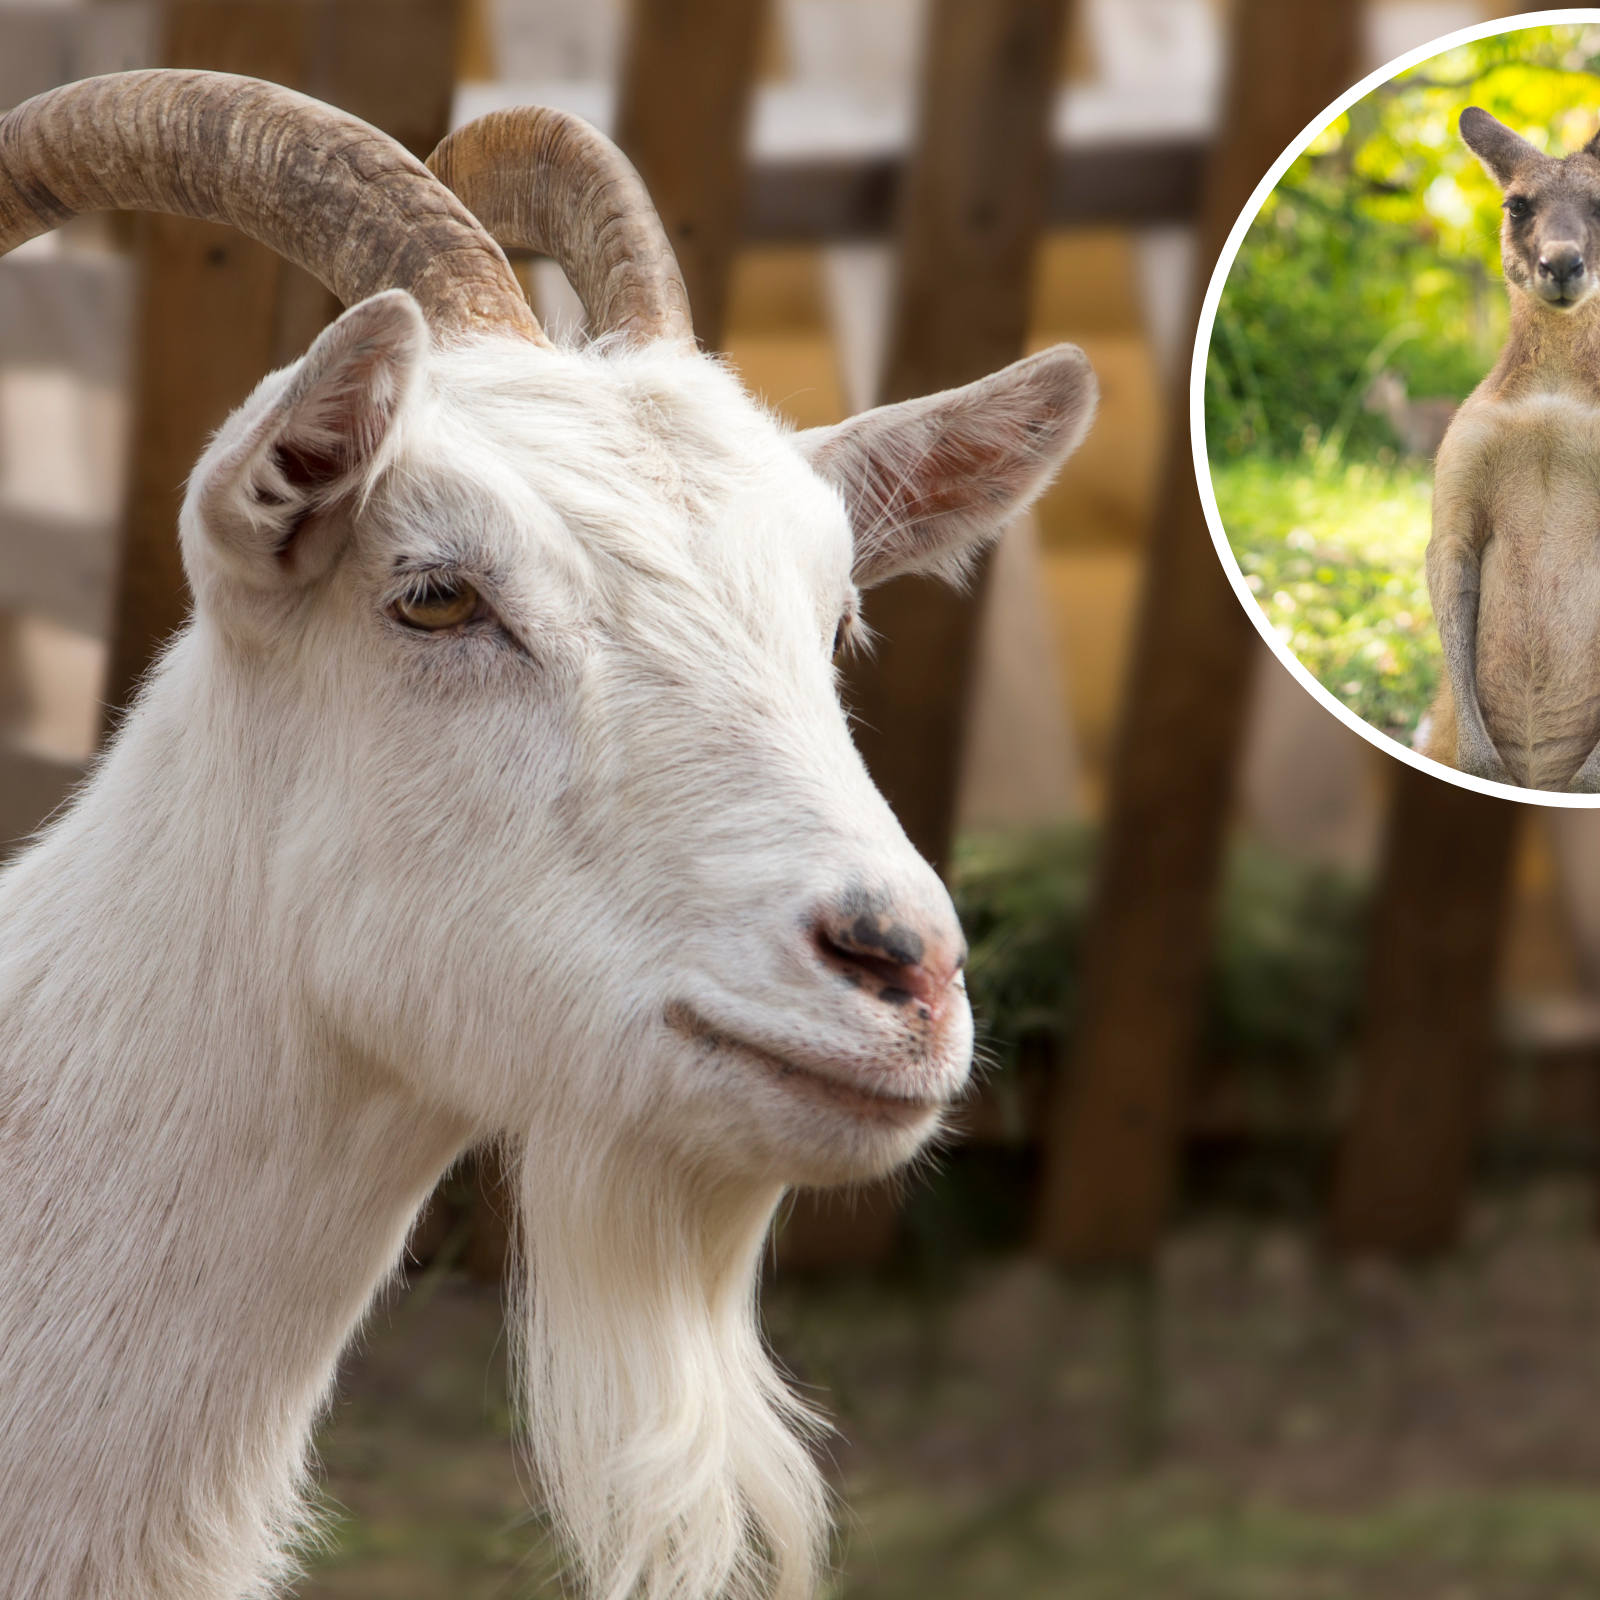 Woman Proves That Her Goat Is 'Broken' as She Films It Copying a Kangaroo